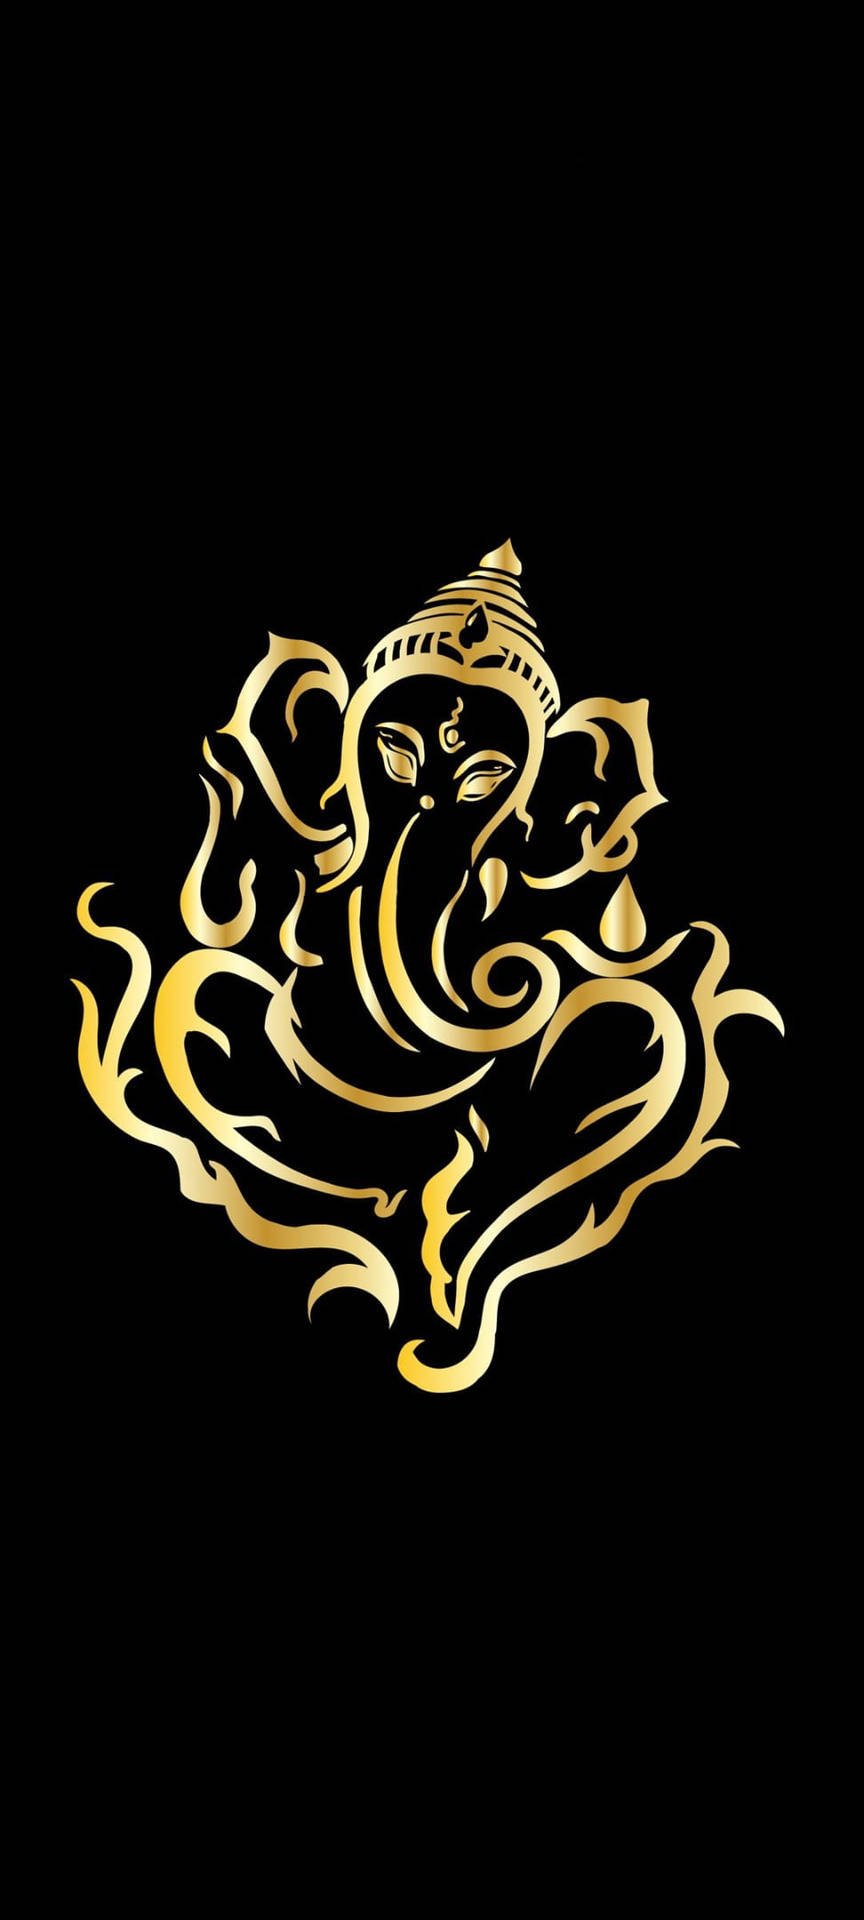 Free Ganesh Iphone Wallpaper Downloads, [100+] Ganesh Iphone Wallpapers for  FREE 